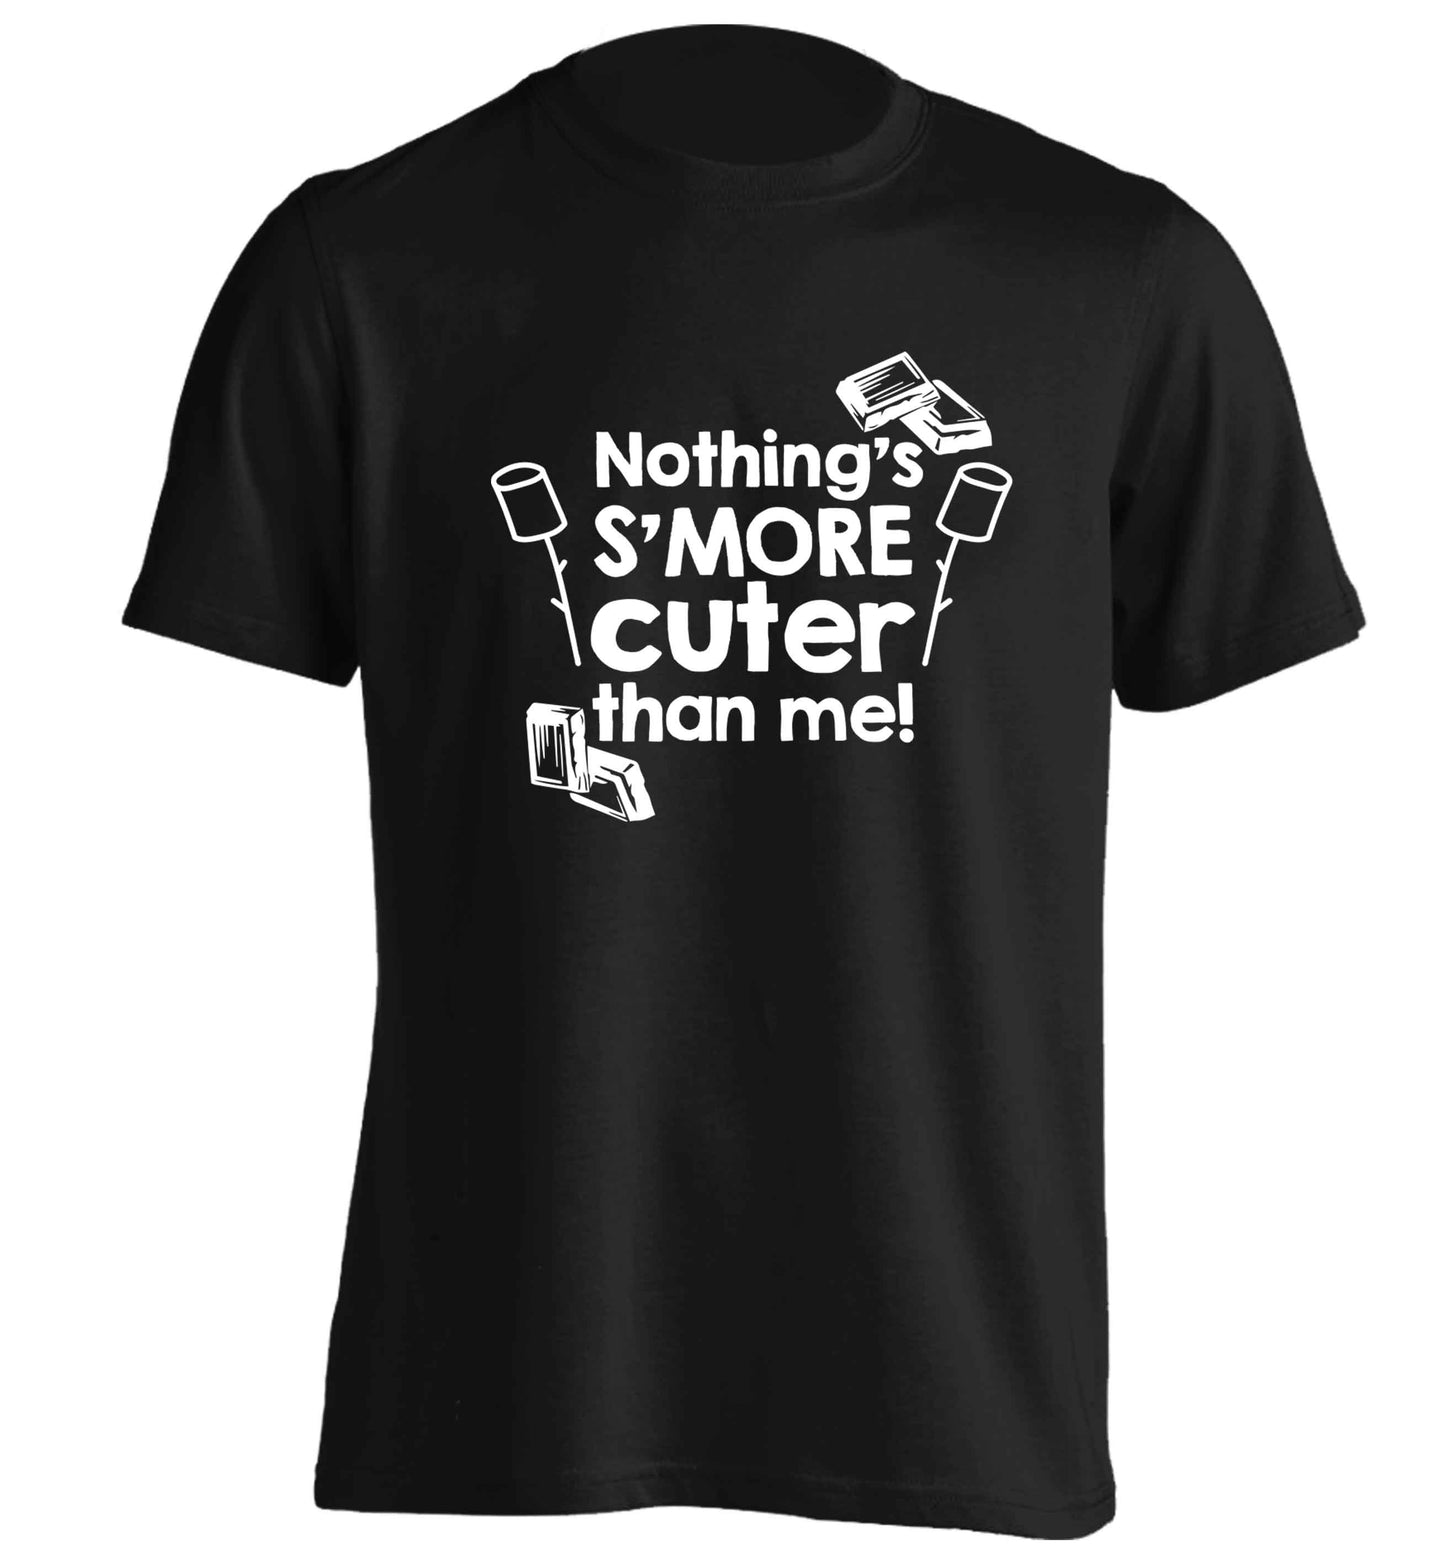 Nothing's s'more cuter than me! adults unisex black Tshirt 2XL